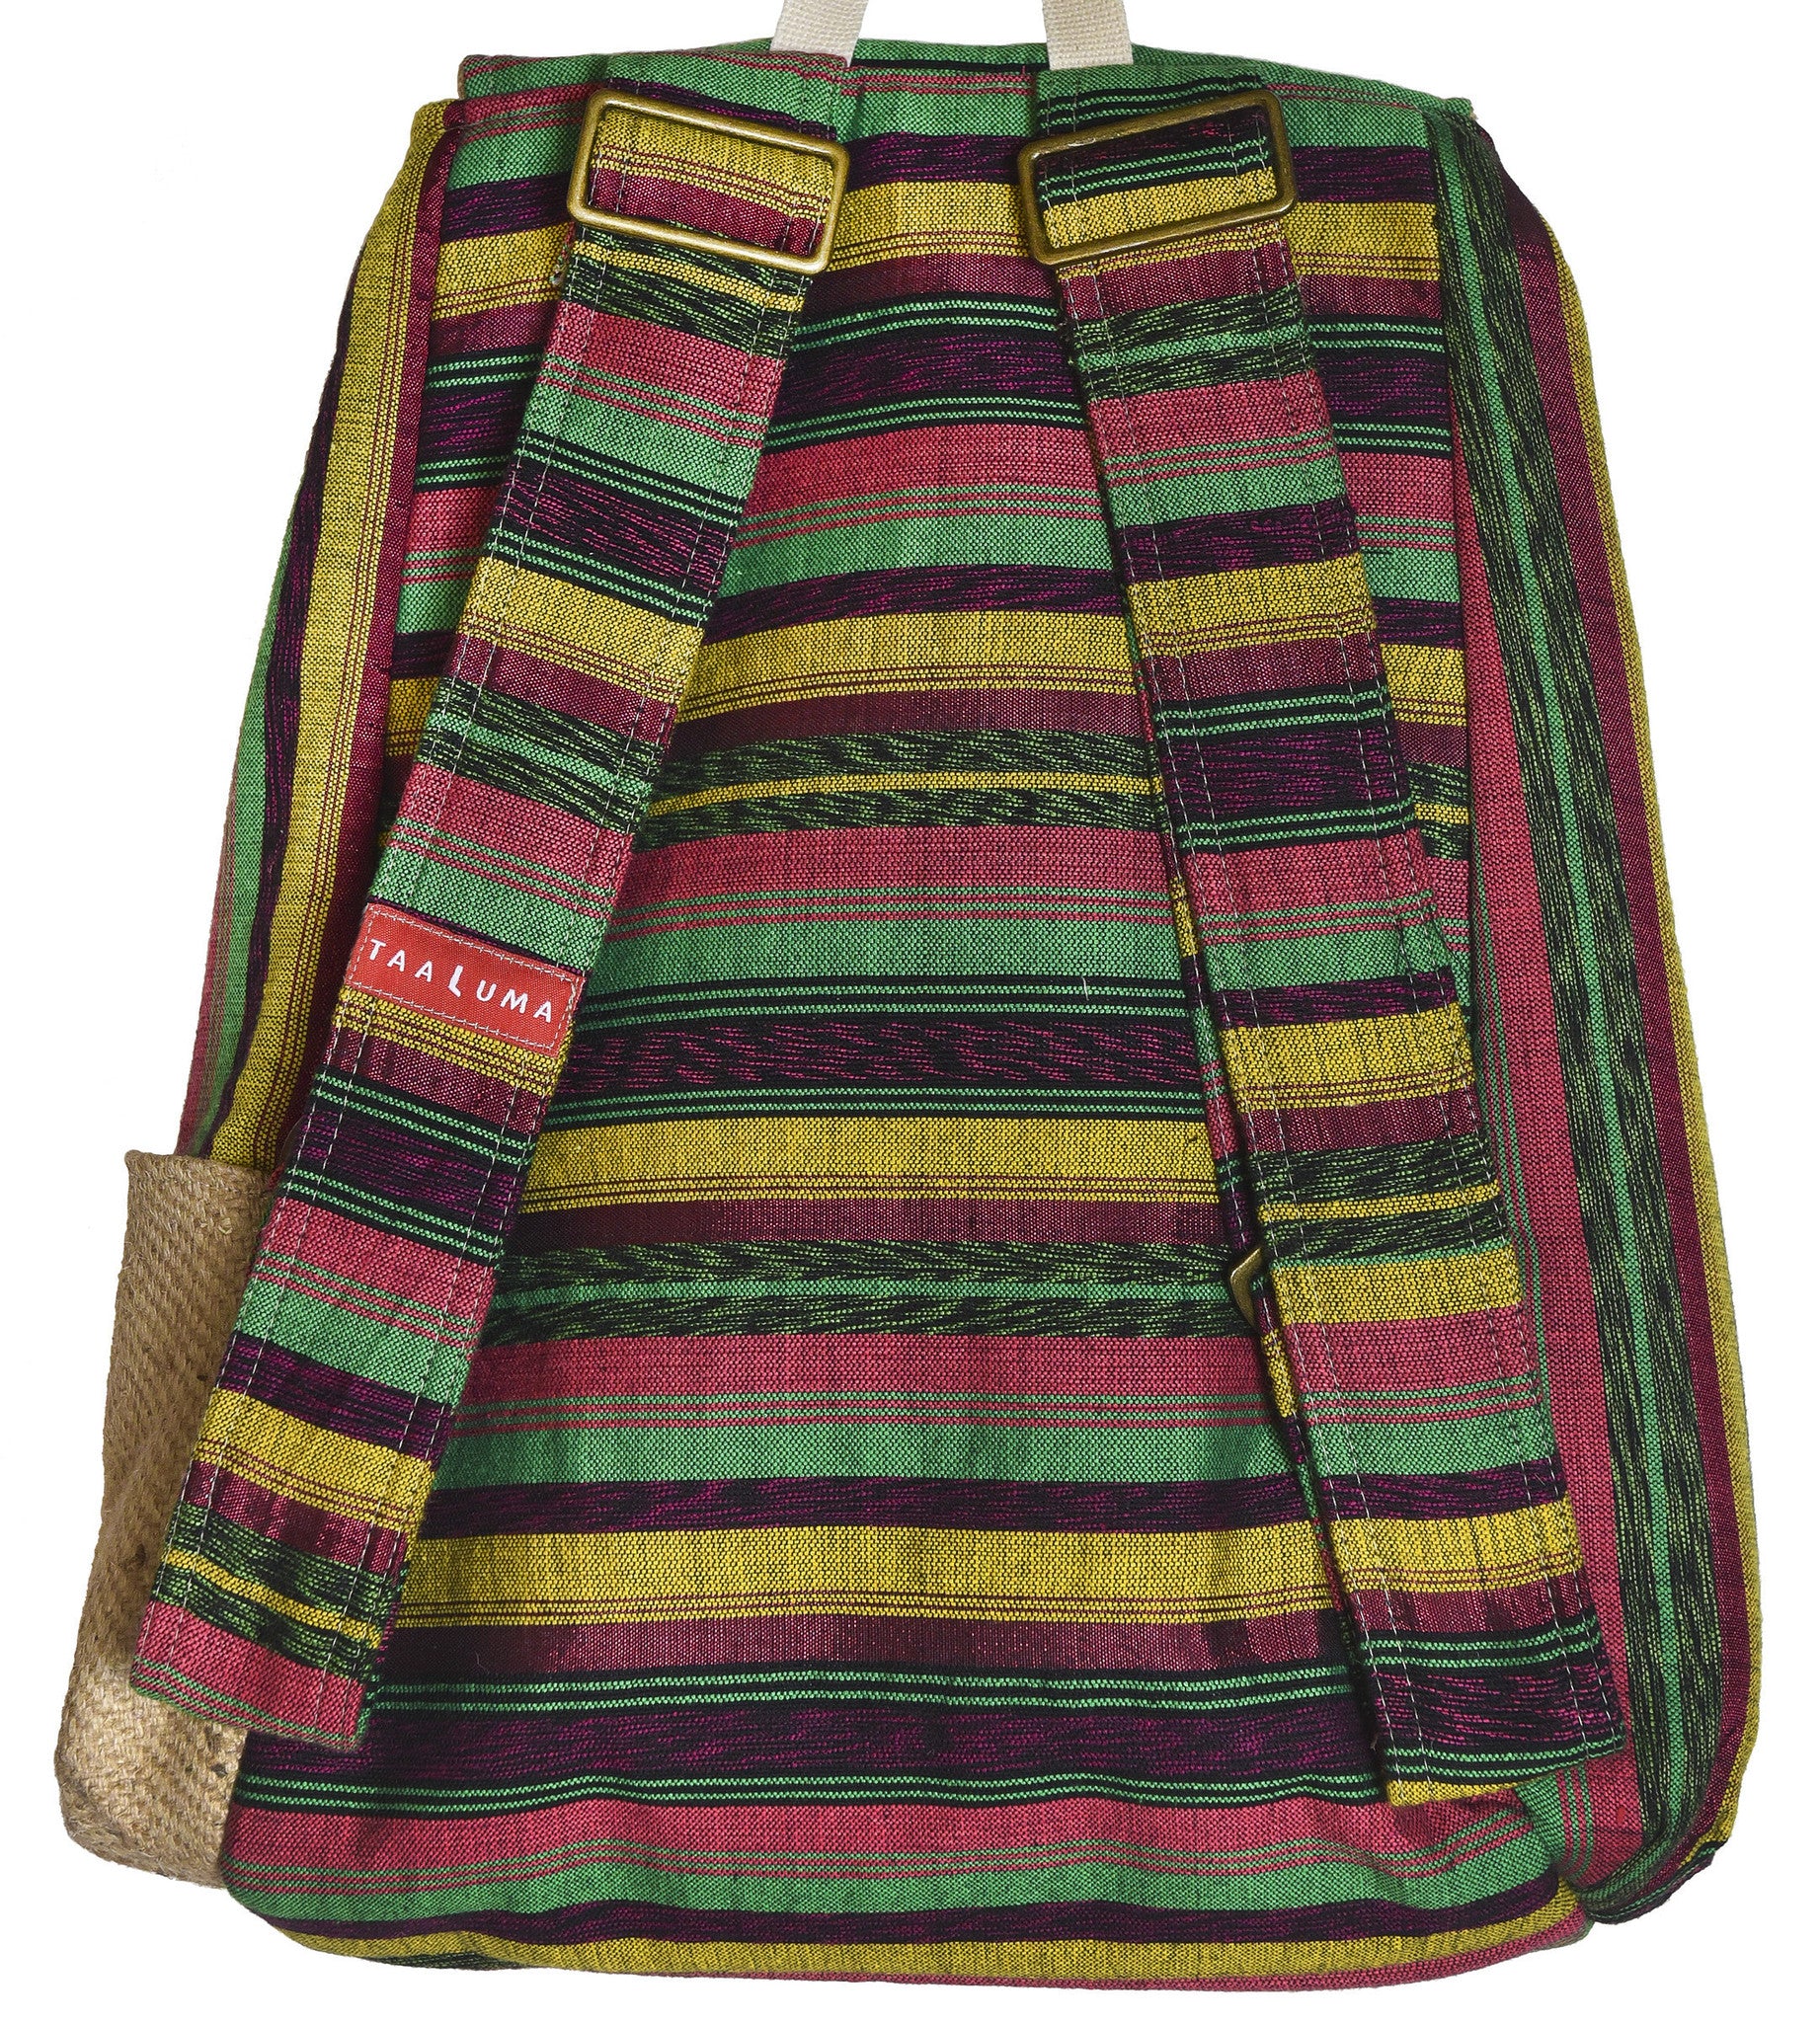 Guatemala Tote (by Francine Roberson)